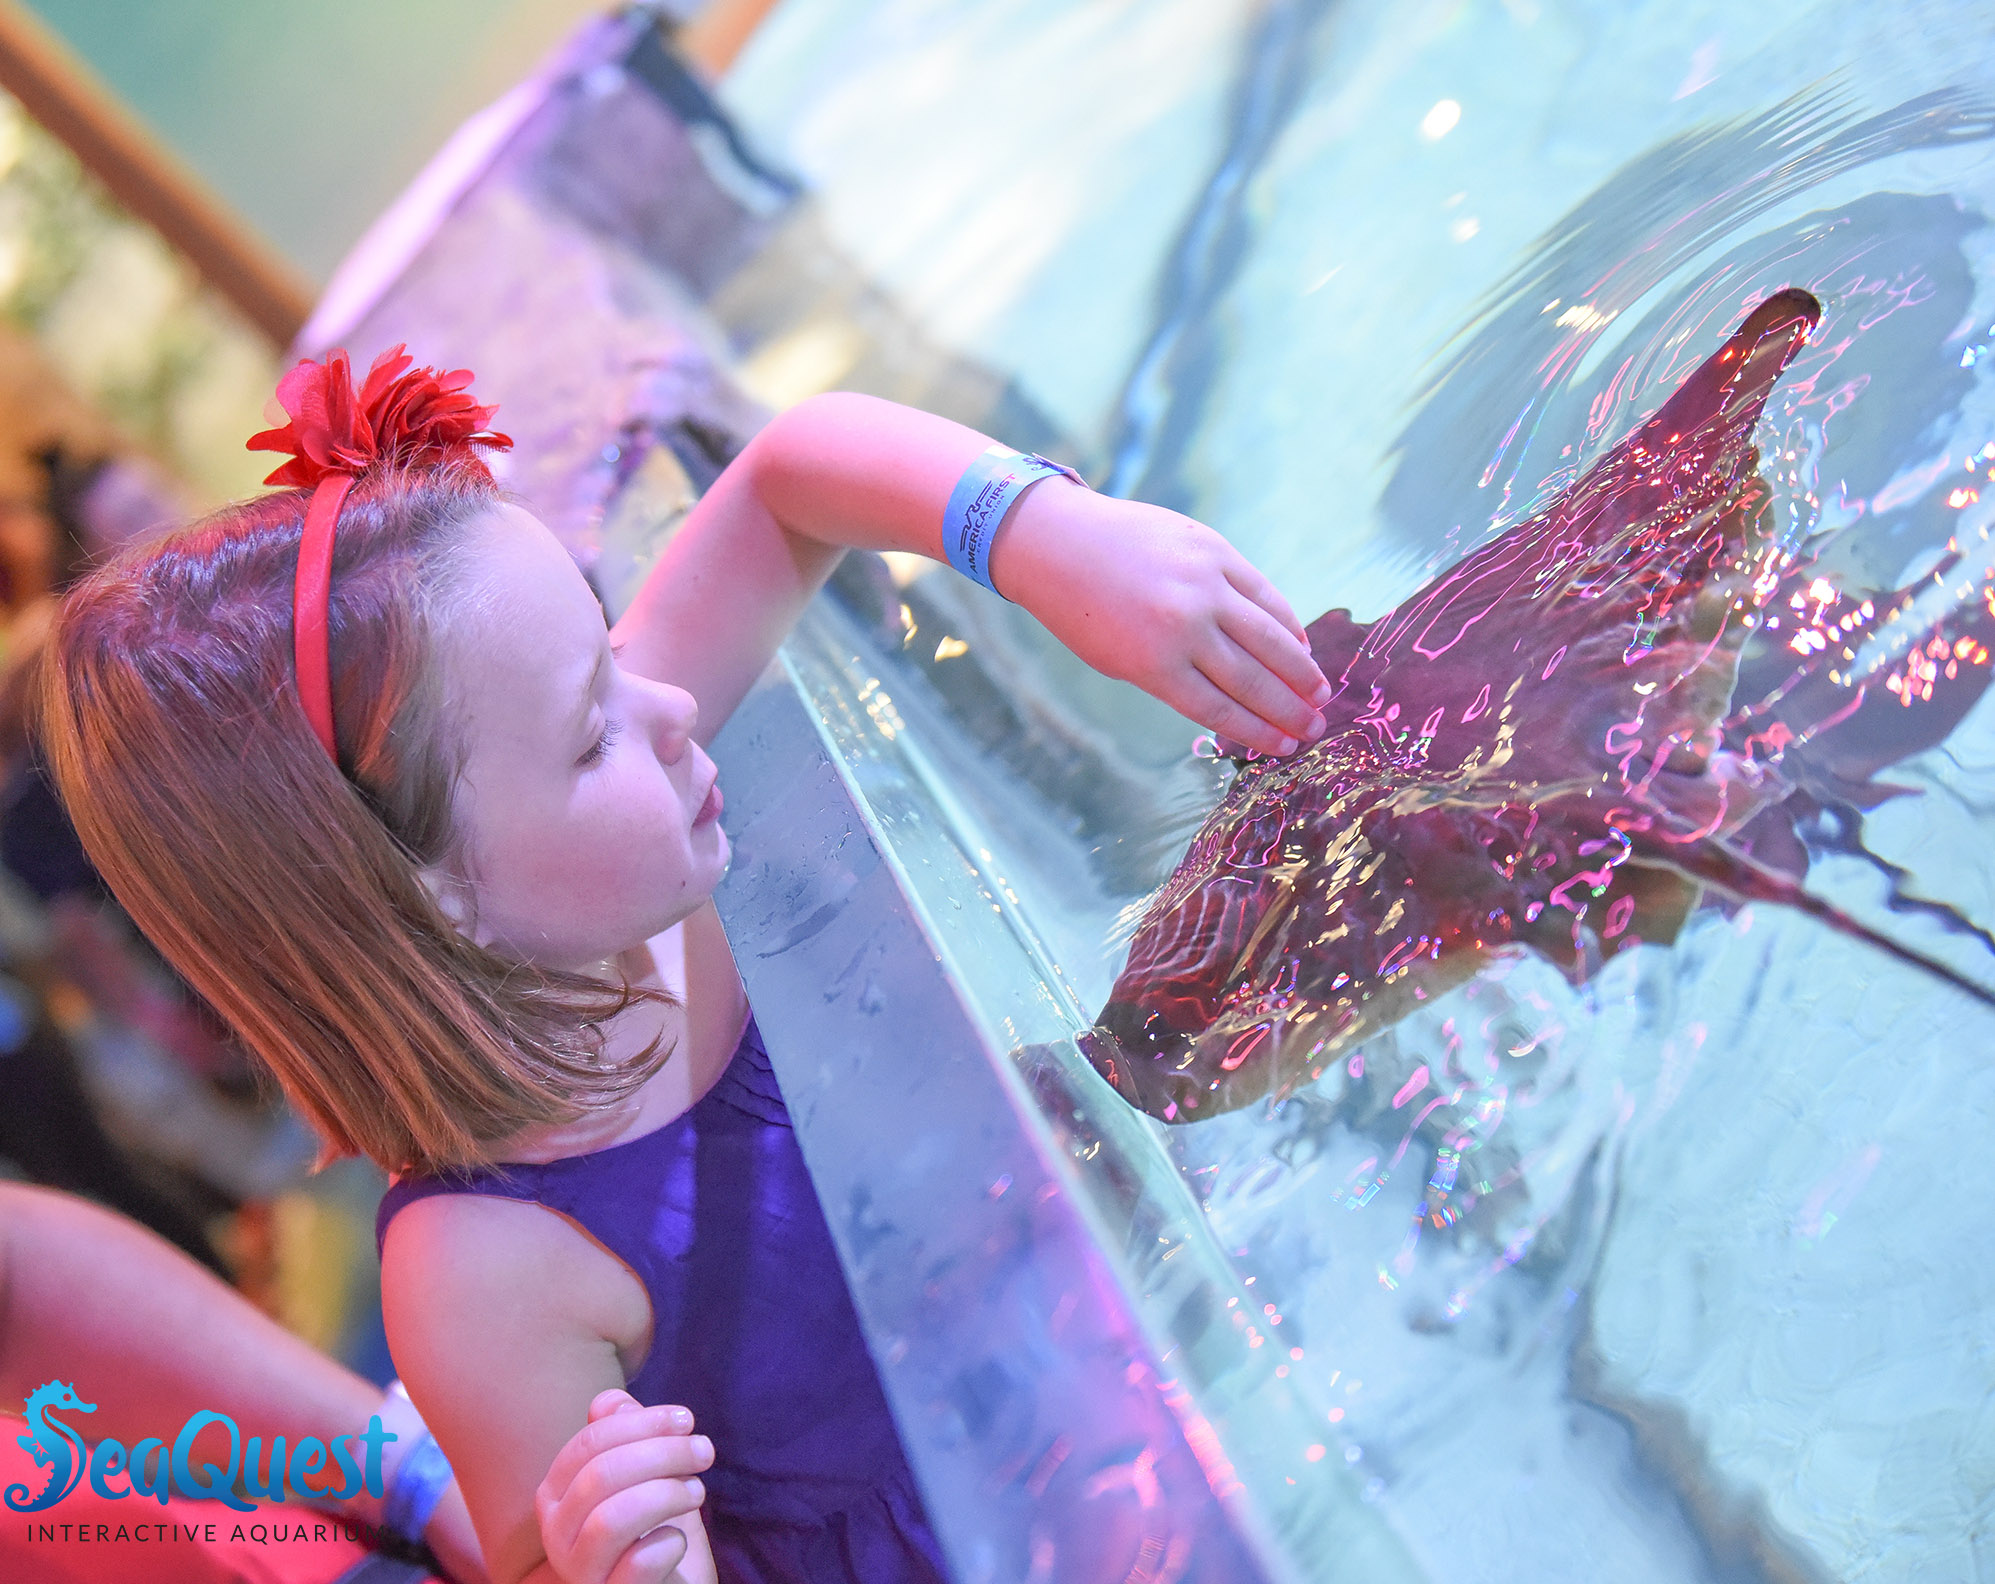 Touch, feed and even snorkel with stingrays!